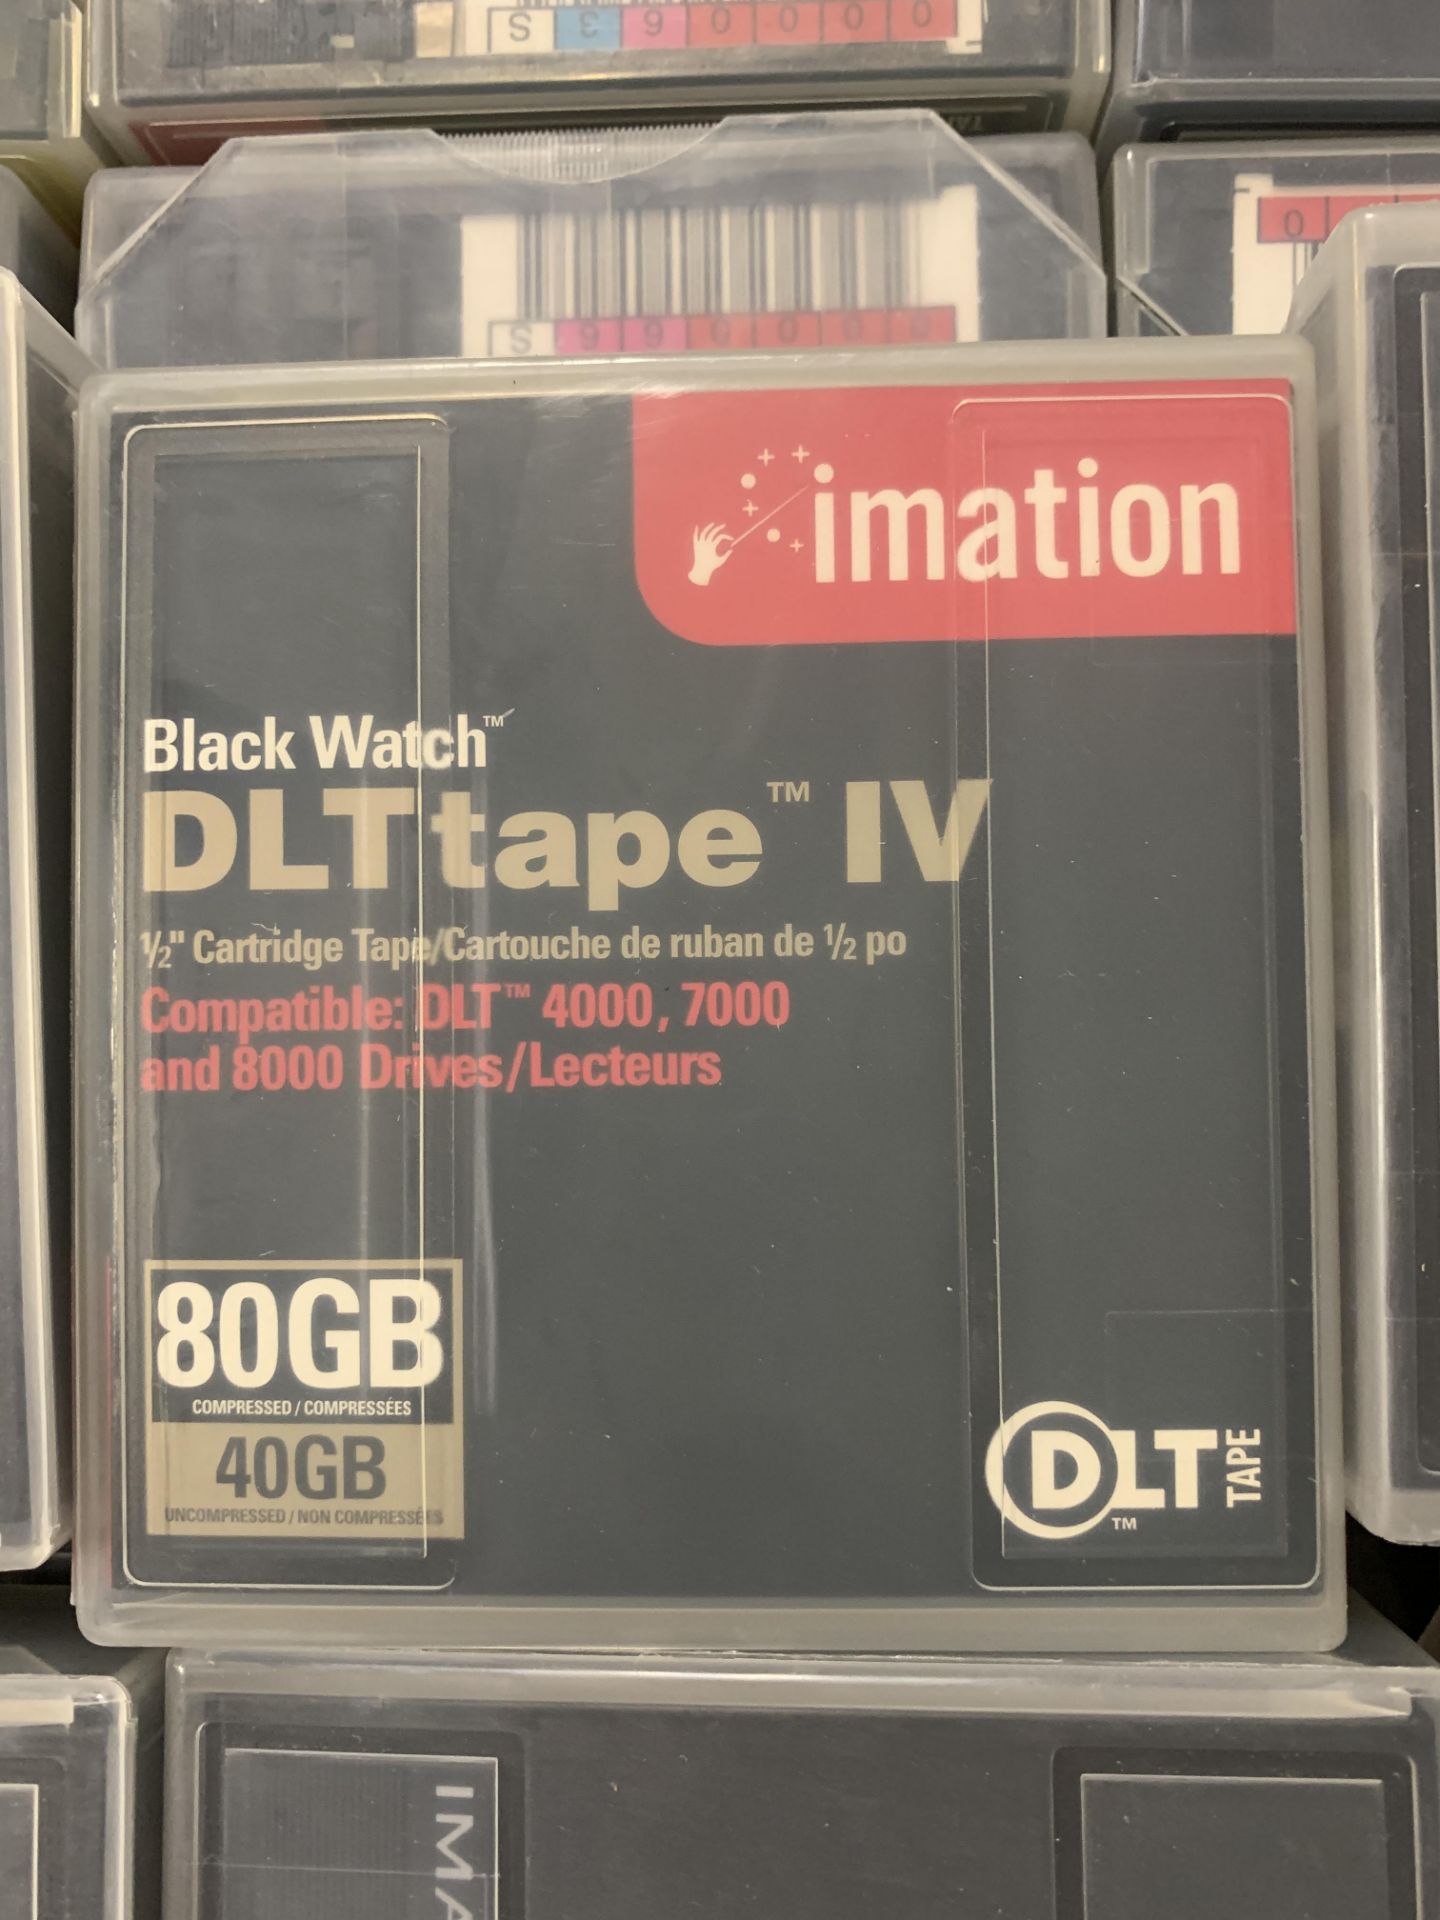 LOT OF 125+ IMATION DLT TAPE IV CARTRIDGES. ALL ITEMS ARE SOLD AS IS UNTESTED BUT CAME FROM A - Image 3 of 6